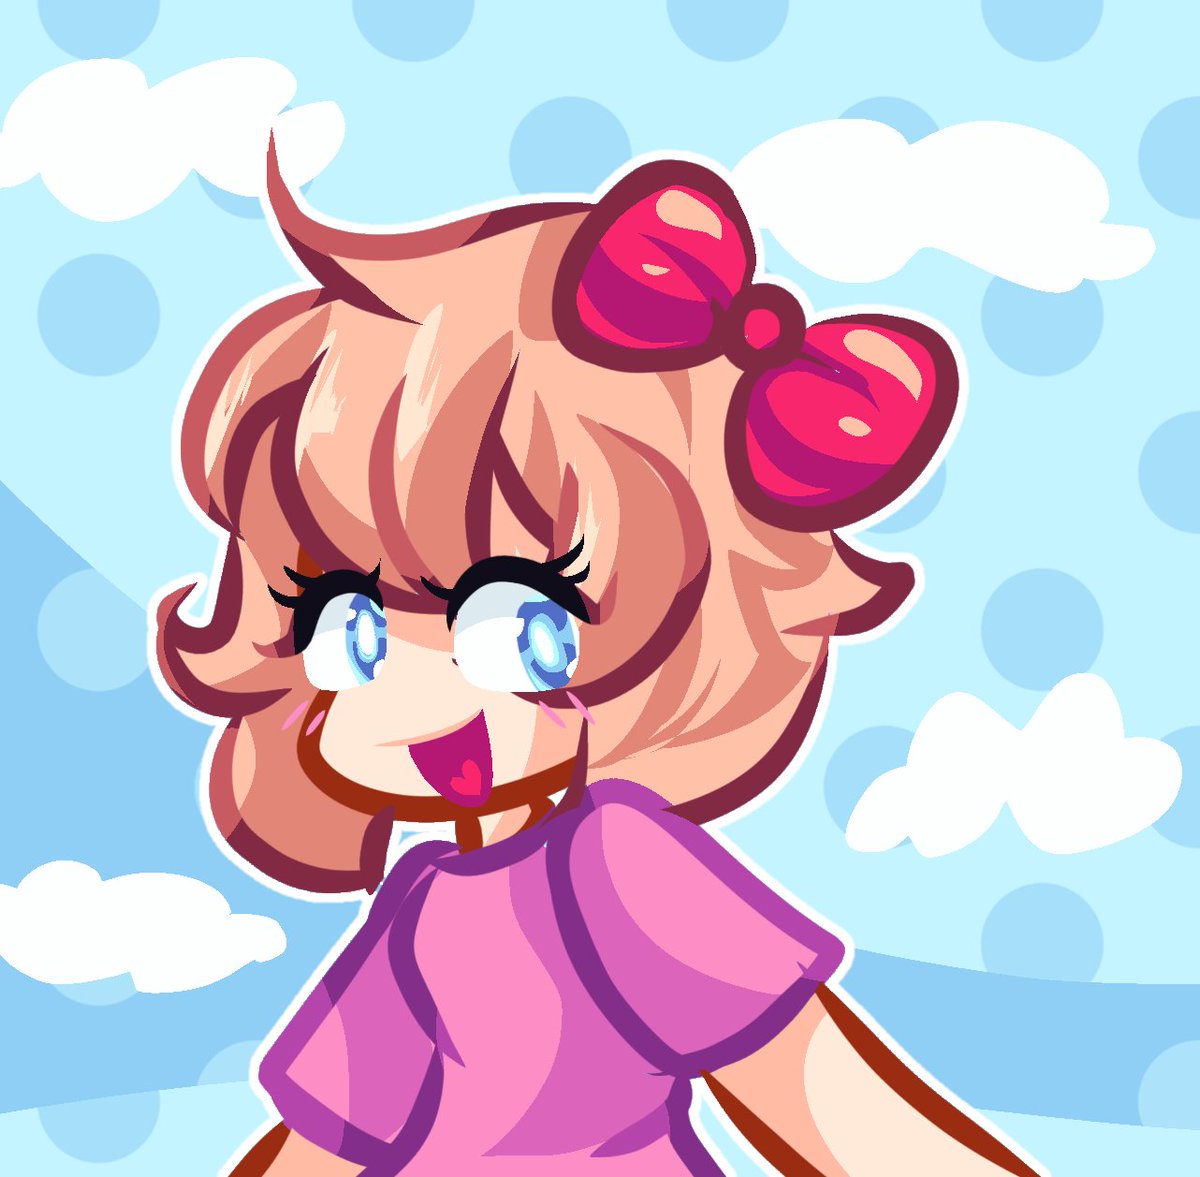 Should I open commissions for this style? #DDLCfanart #sayori